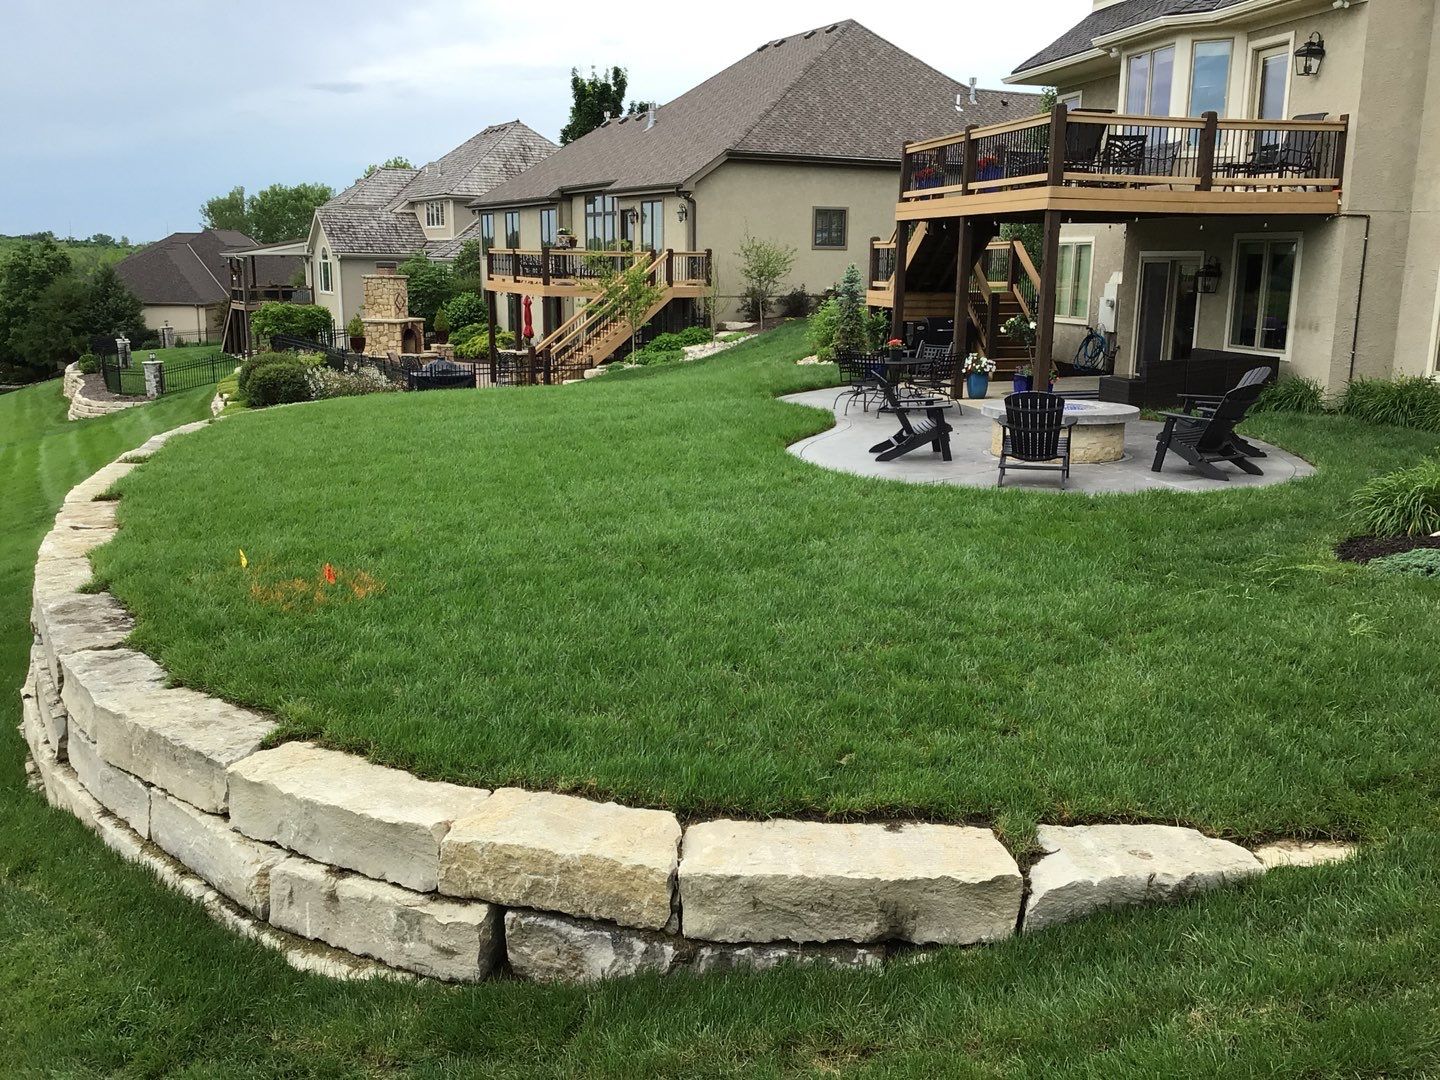 retaining wall in backyard of home along with patio and fire pit